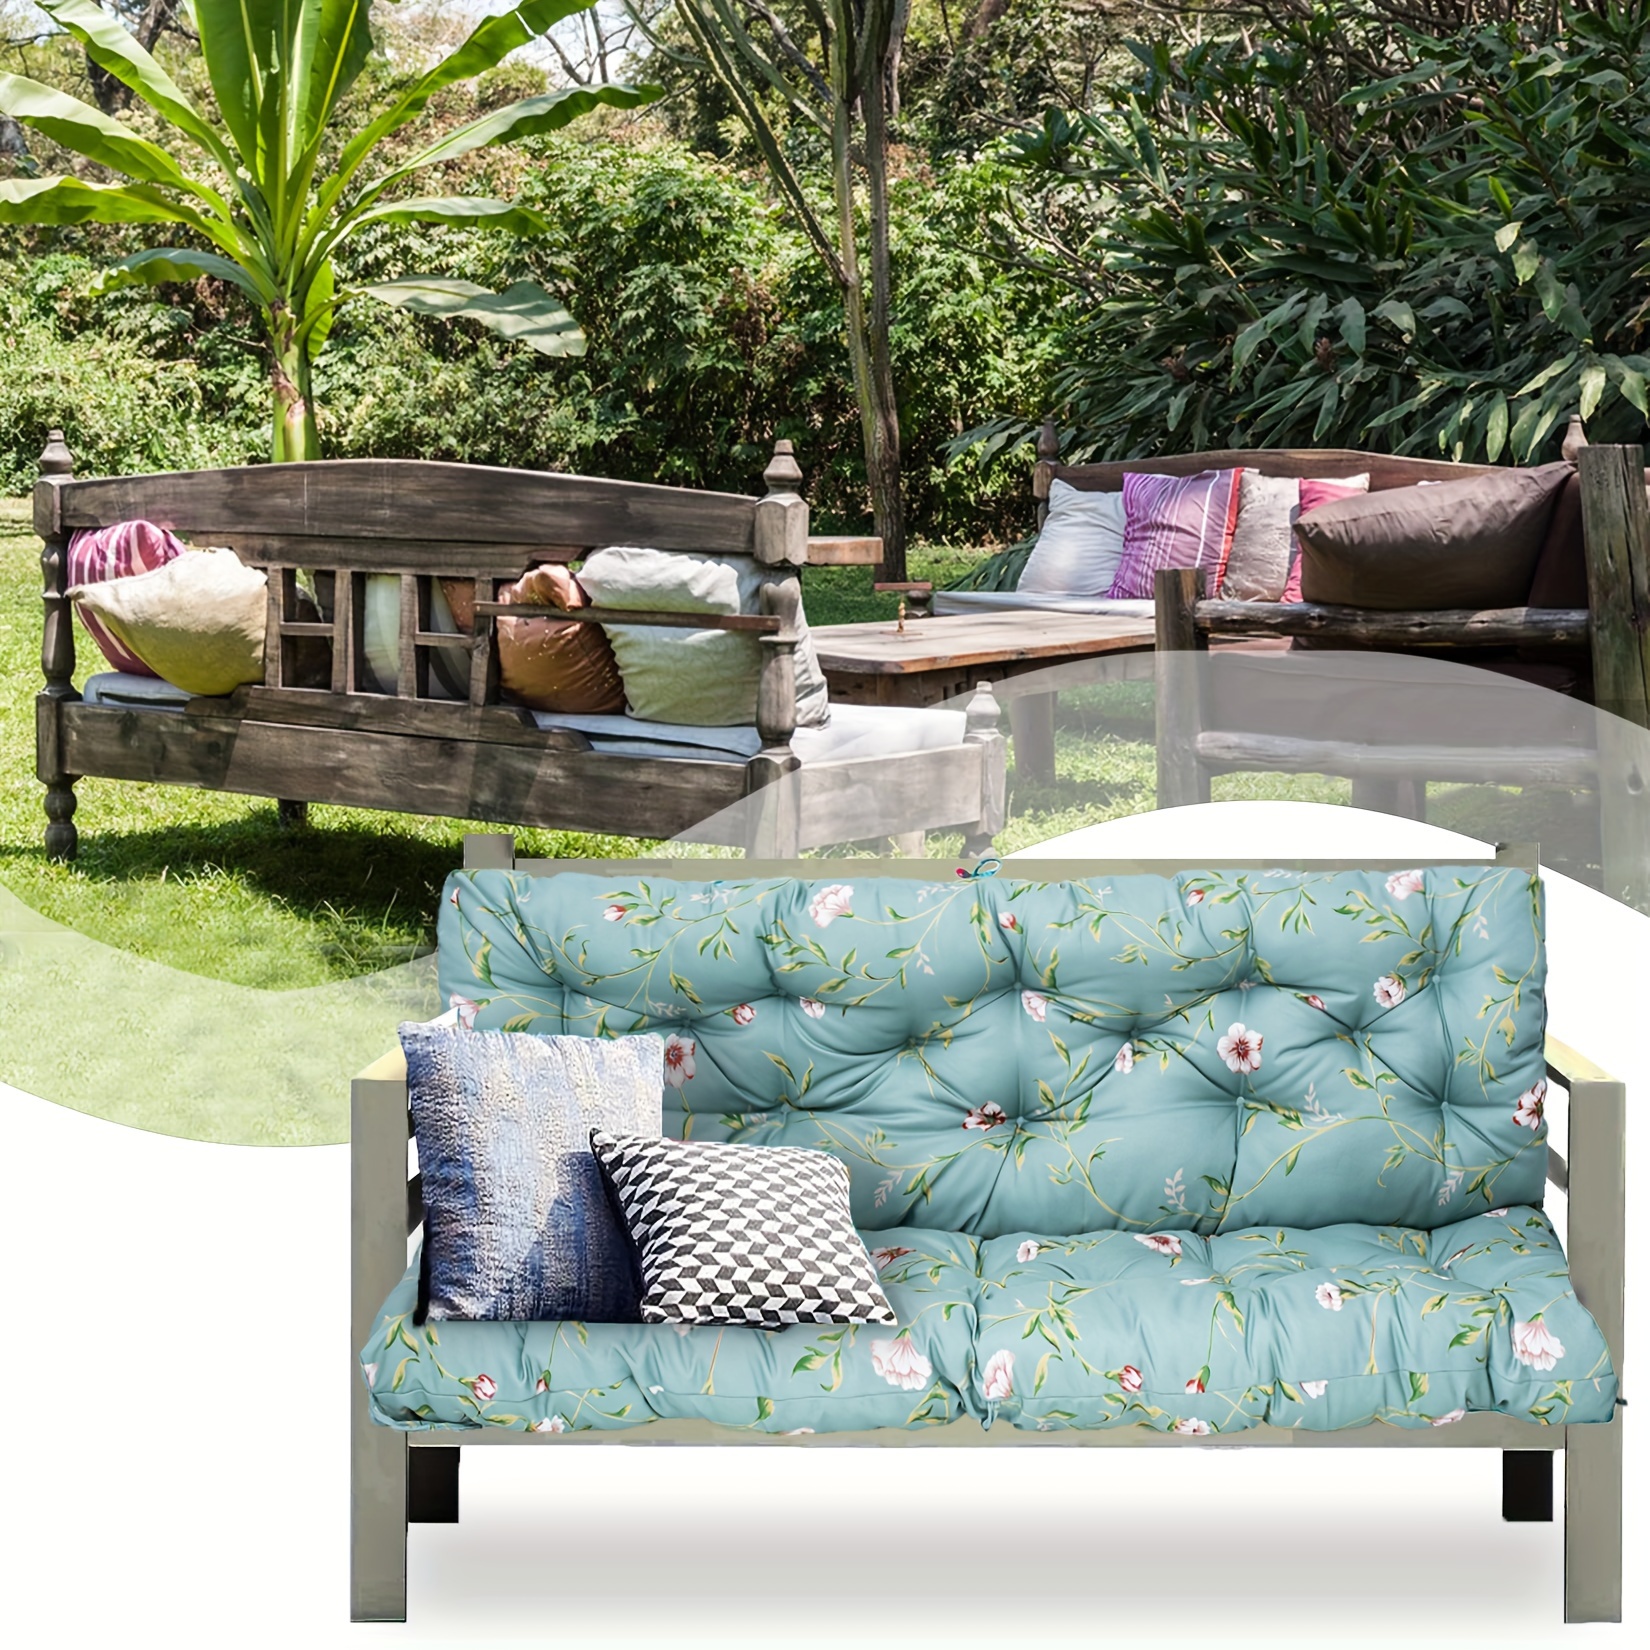 

Thickened One-piece Outdoor Sofa Cushion, Dustproof And Rainproof Sunscreen Fabric, Soft And Comfortable, Suitable For Indoor And Outdoor, Sofas, Benches, Chairs, Deckchairs, Swings